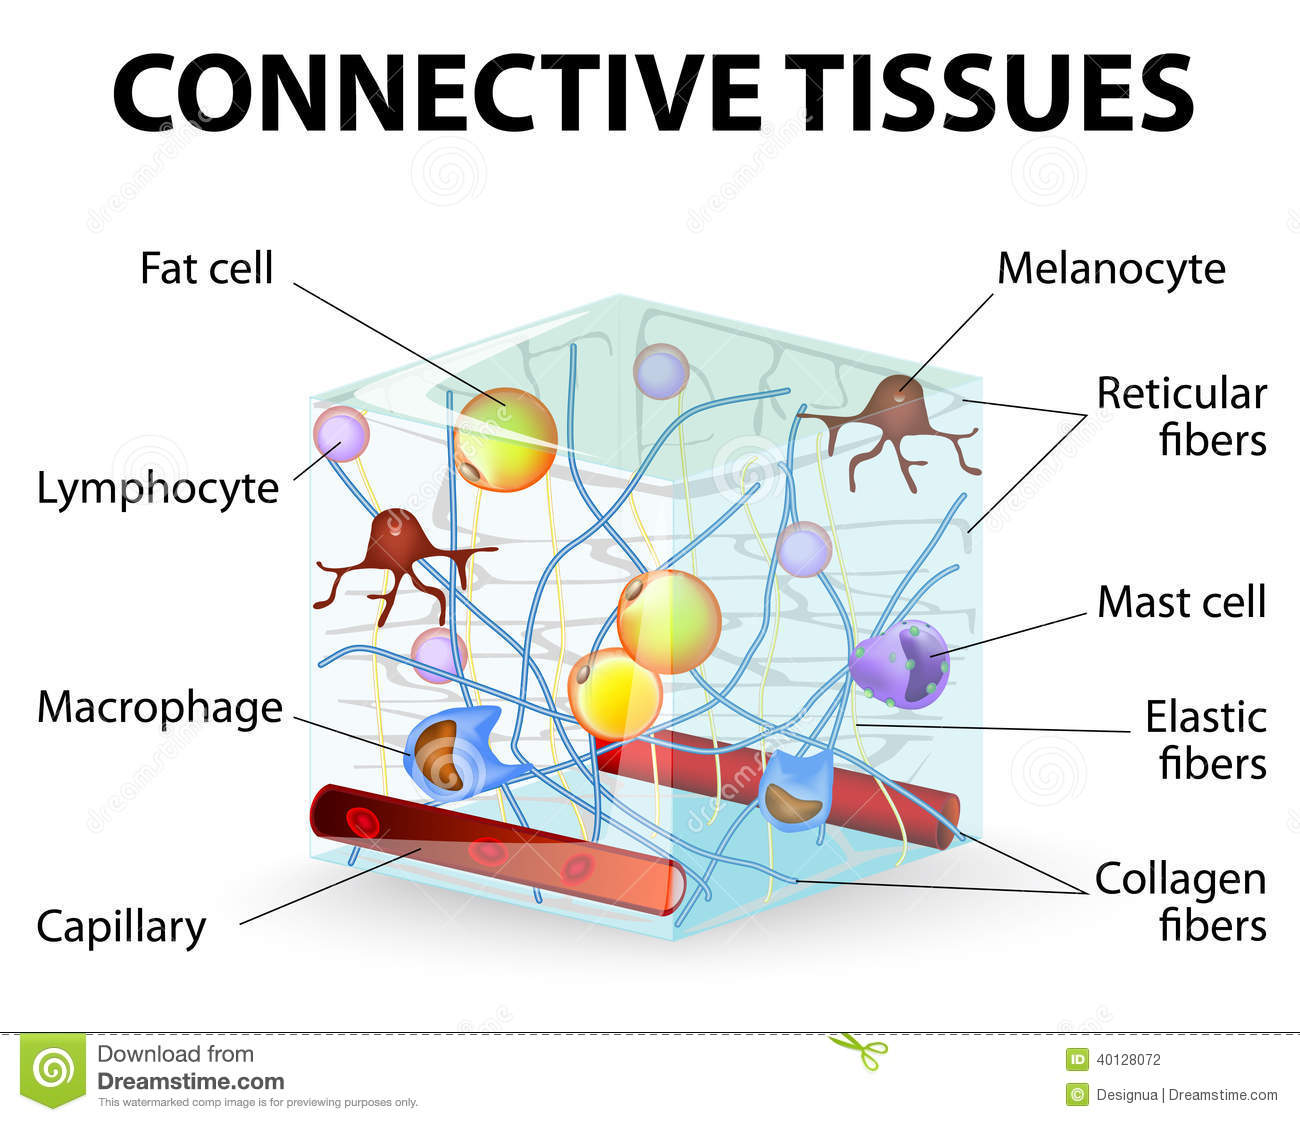 Connective Tissue That Supports Binds Or Separates More Specialized